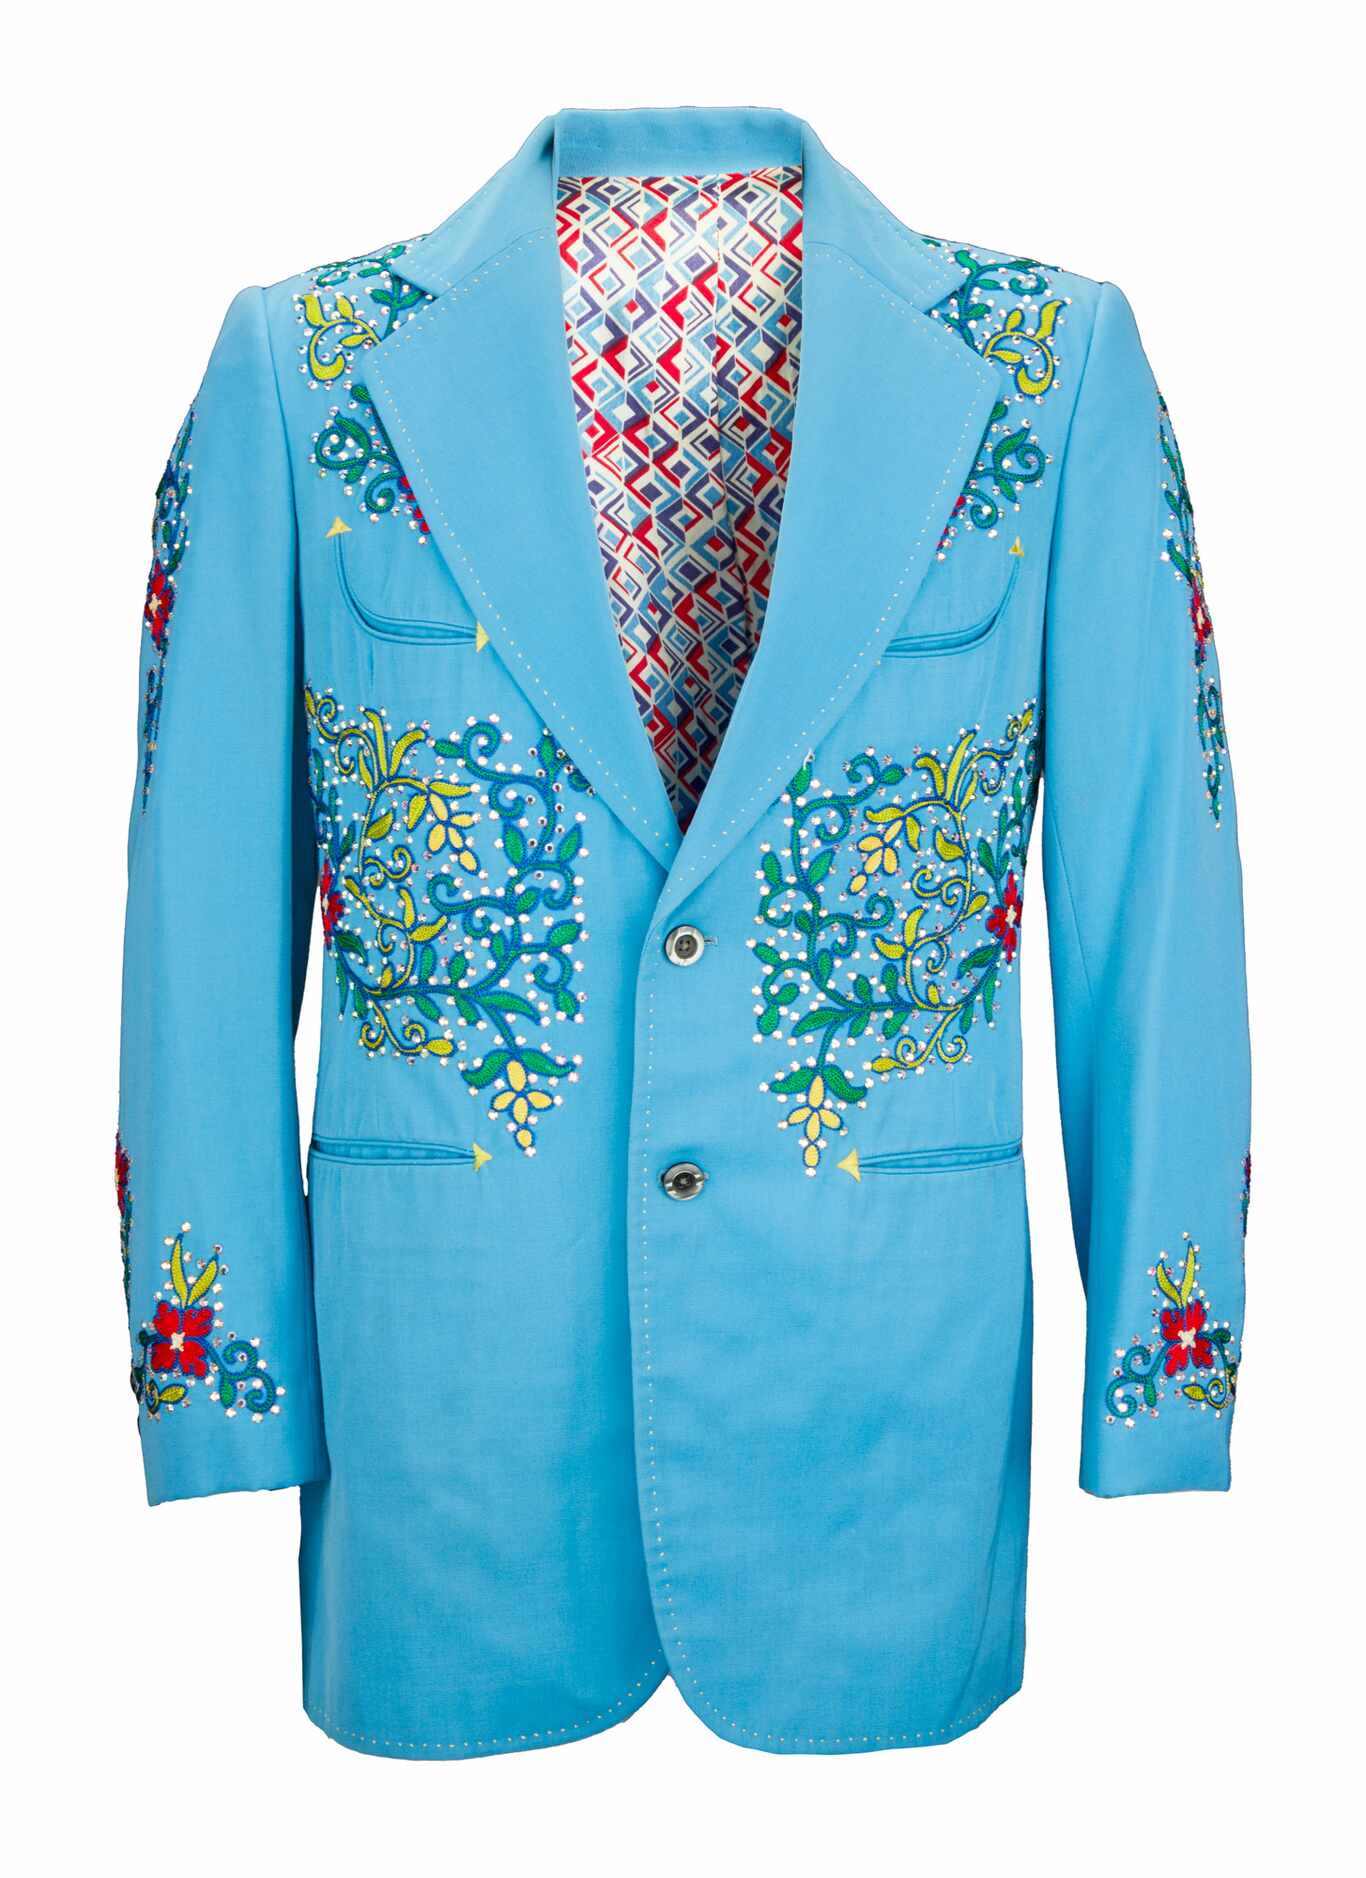 Dusty Hill s custom sky-blue wool suit jacket with yellow and red embroidered flowers...